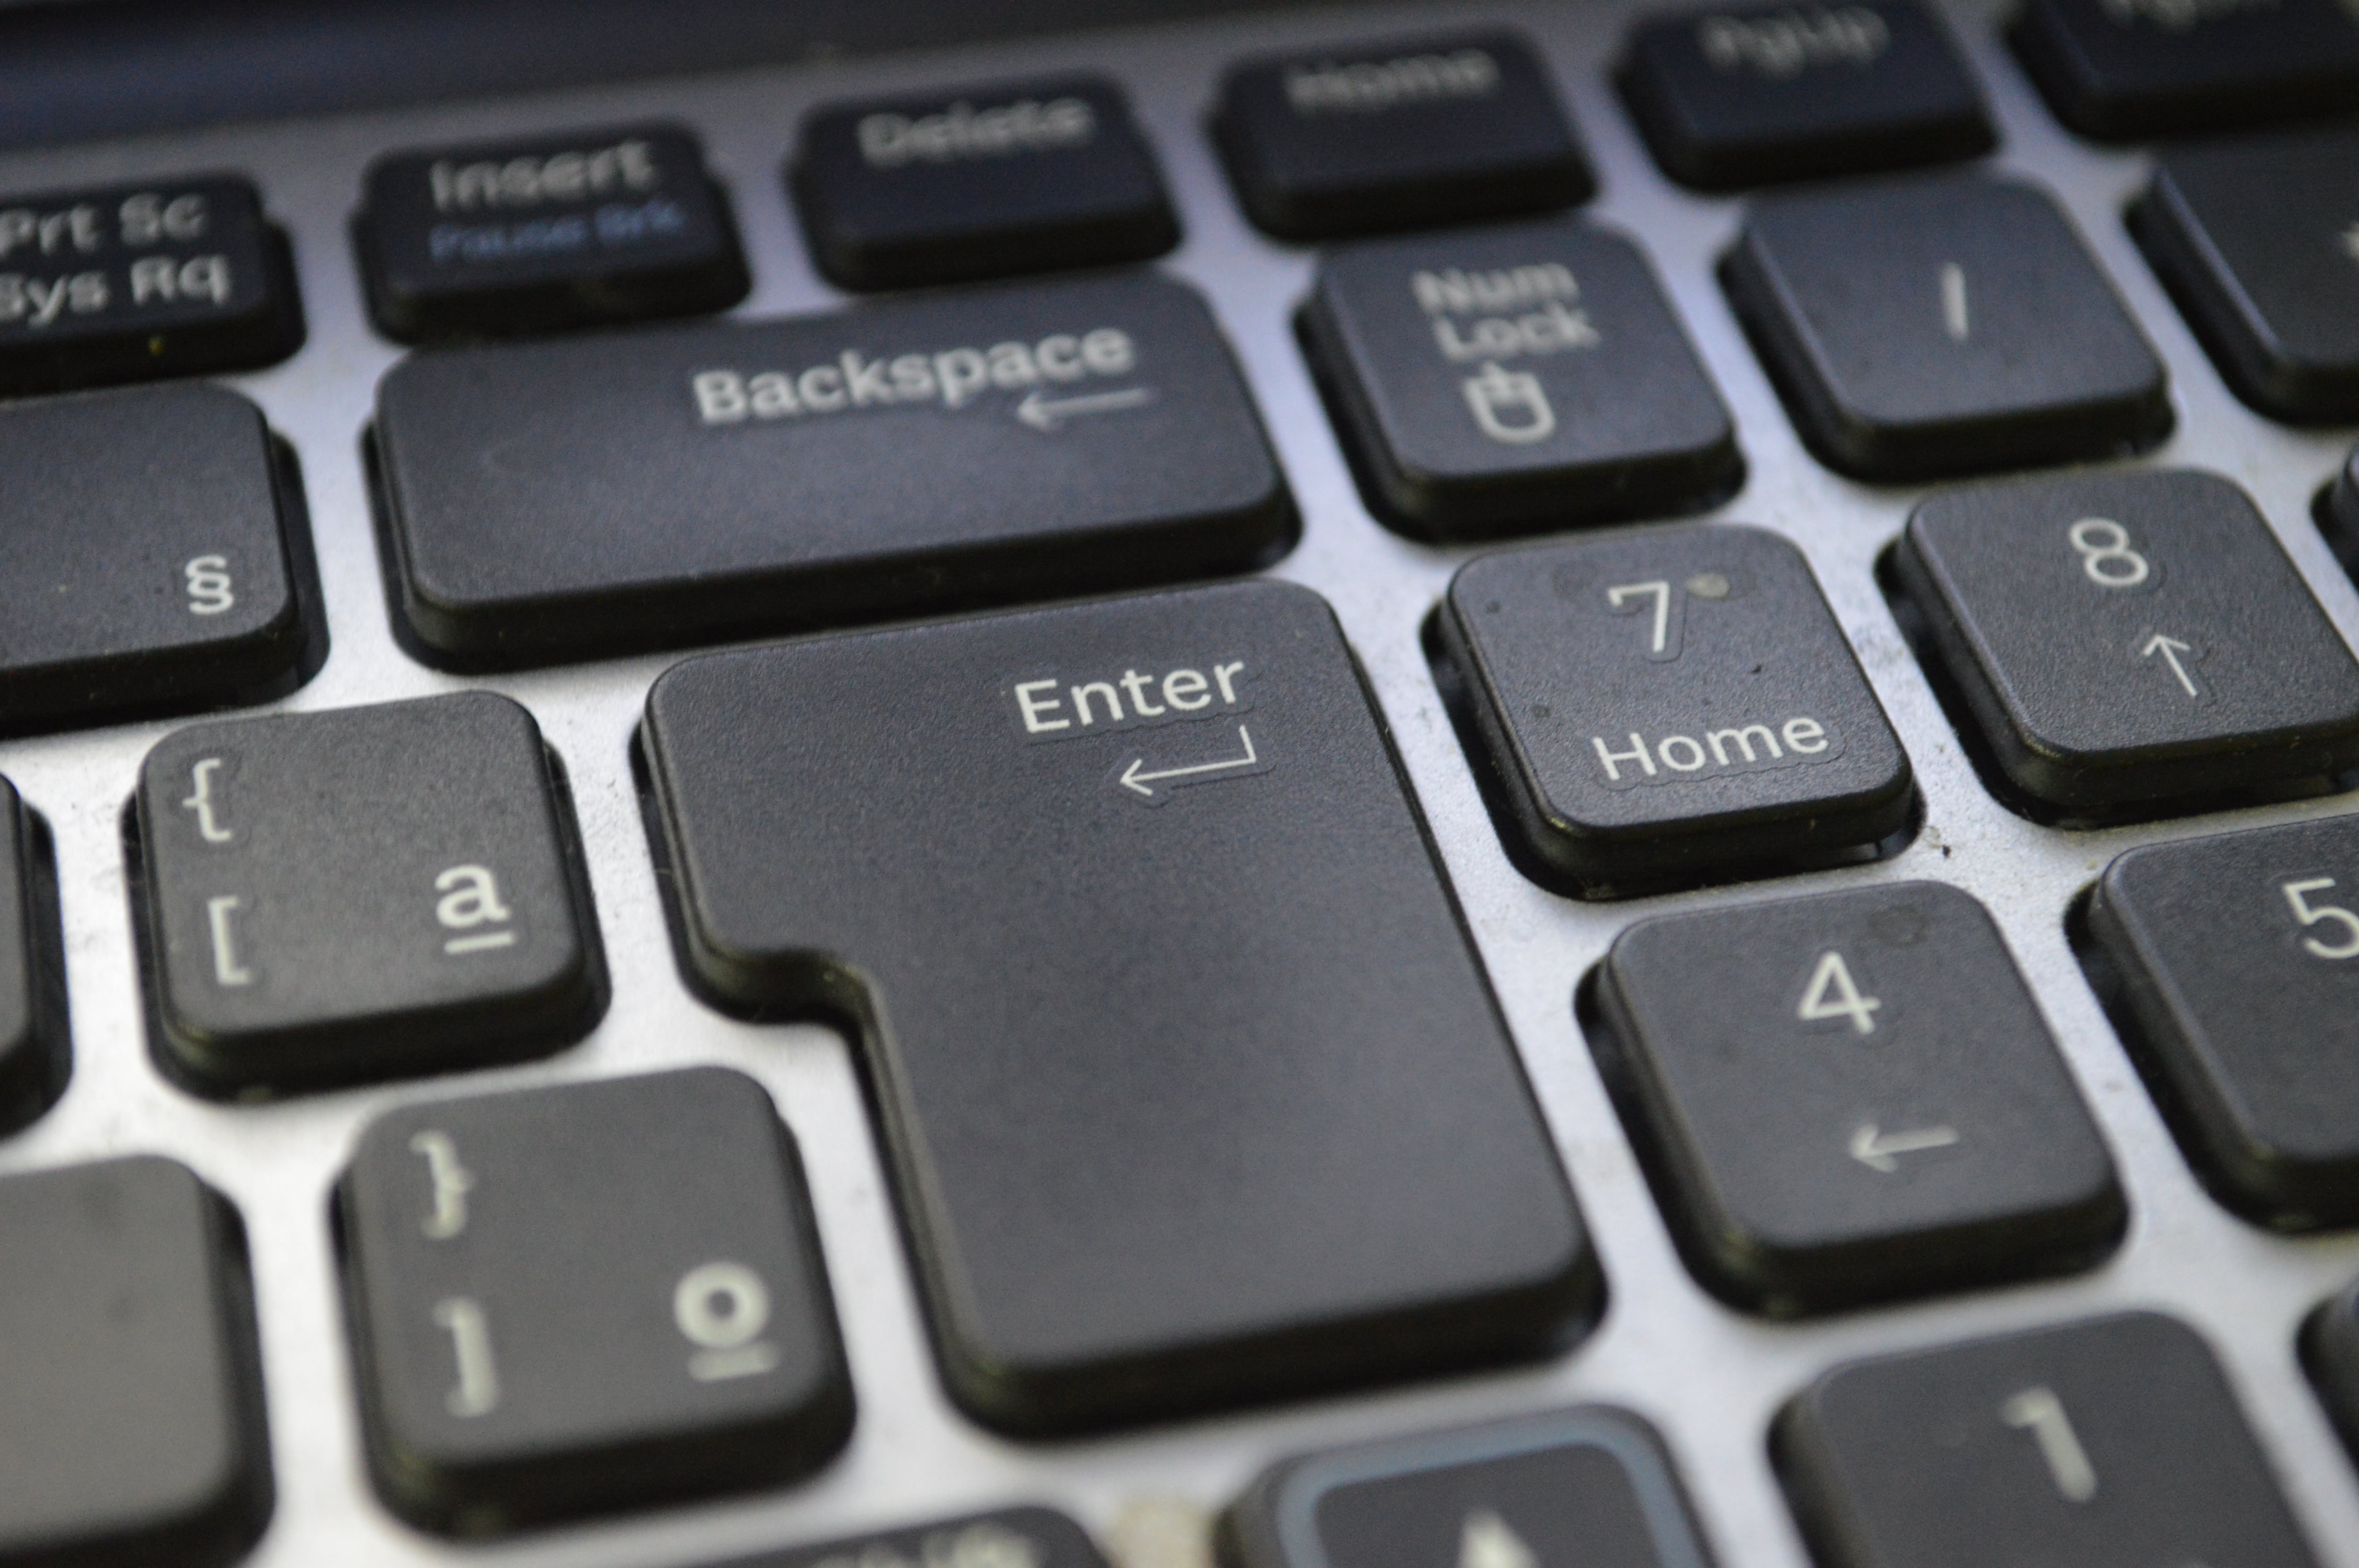 Image of an Enter key on a keyboard for a blog about the Best Day to Post a Blog.